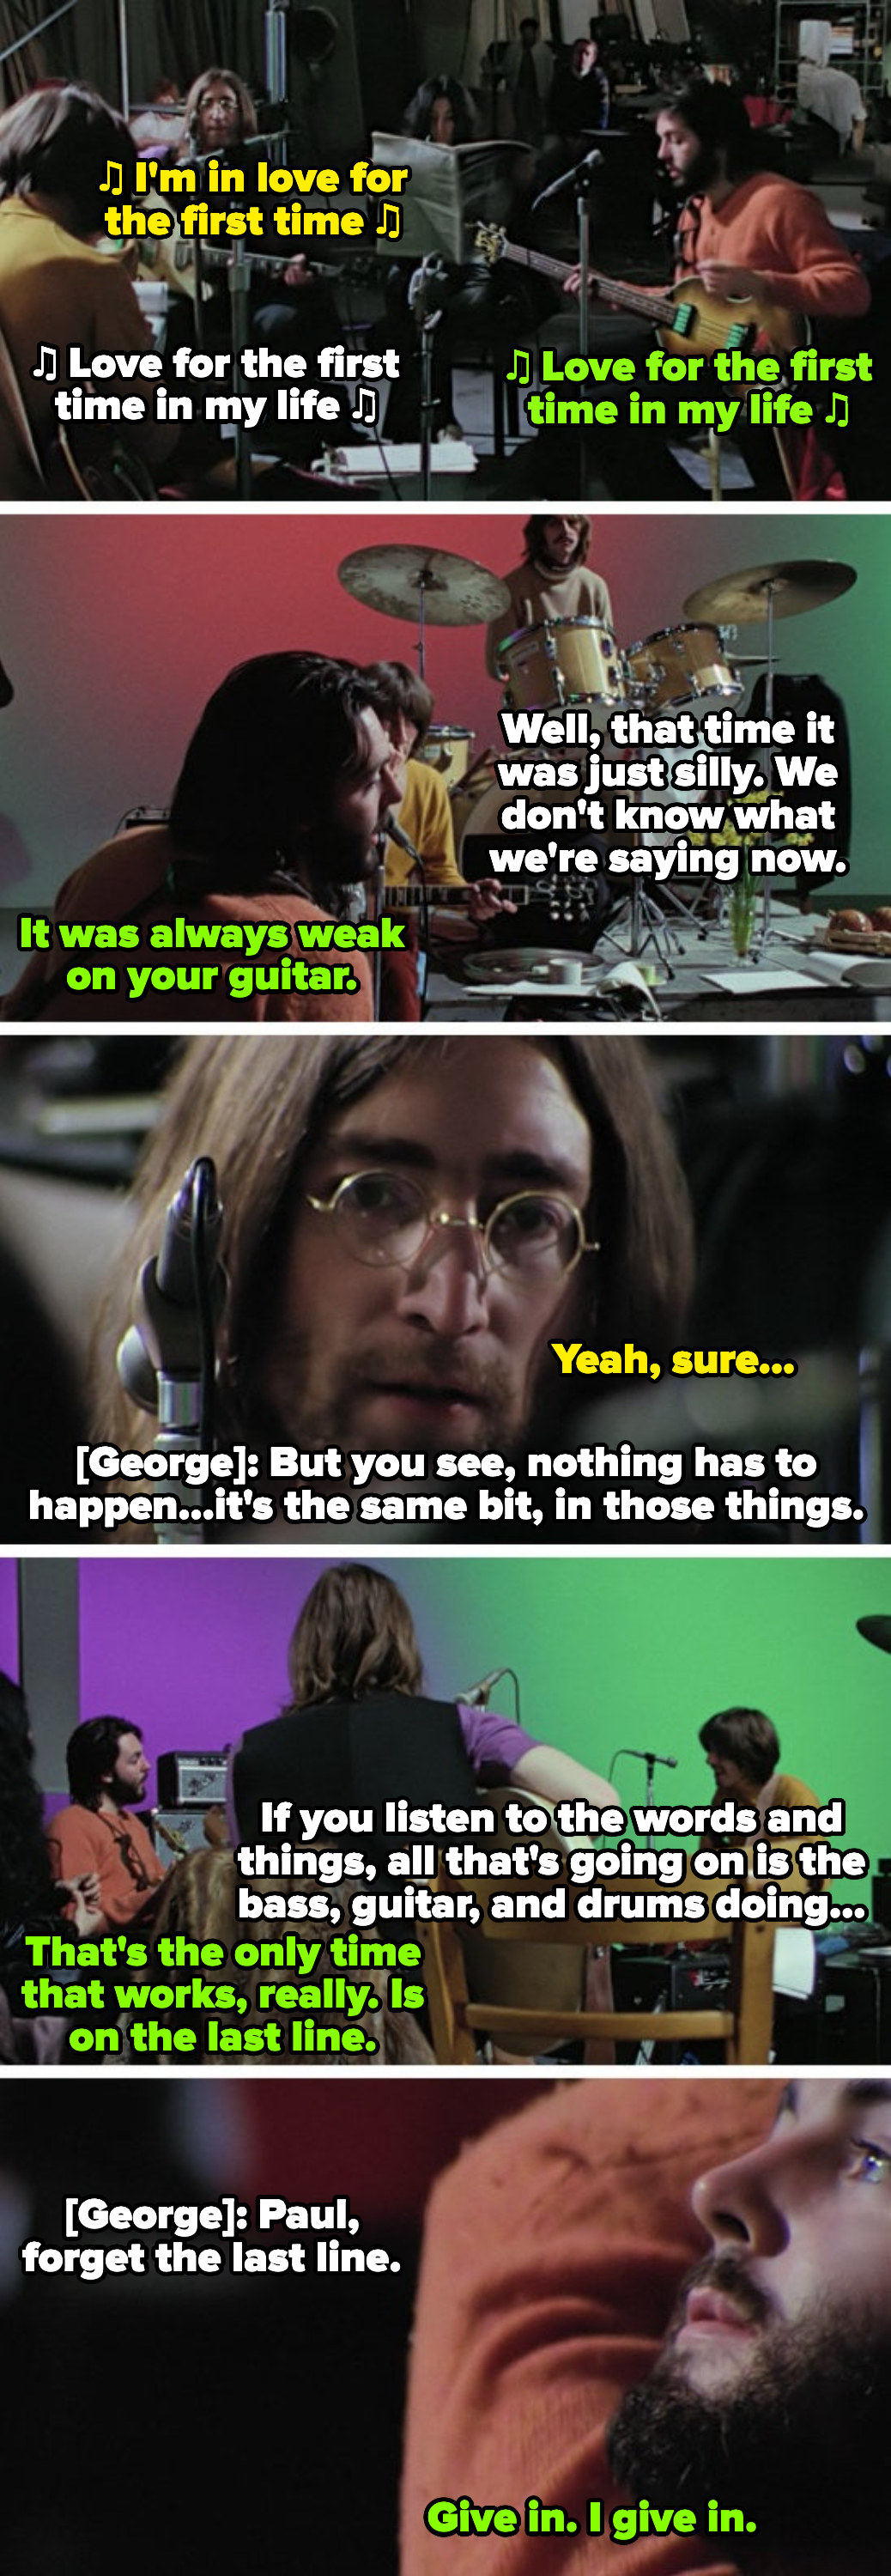 Paul to John: &quot;It was always weak on your guitar&quot; John to Paul: &quot;Yeah, sure&quot; George to Paul: &quot;If you listen to the words, all that&#x27;s going on is the bass, guitar, and drums doing&quot; Paul to George: &quot;Give in; I give in&quot;